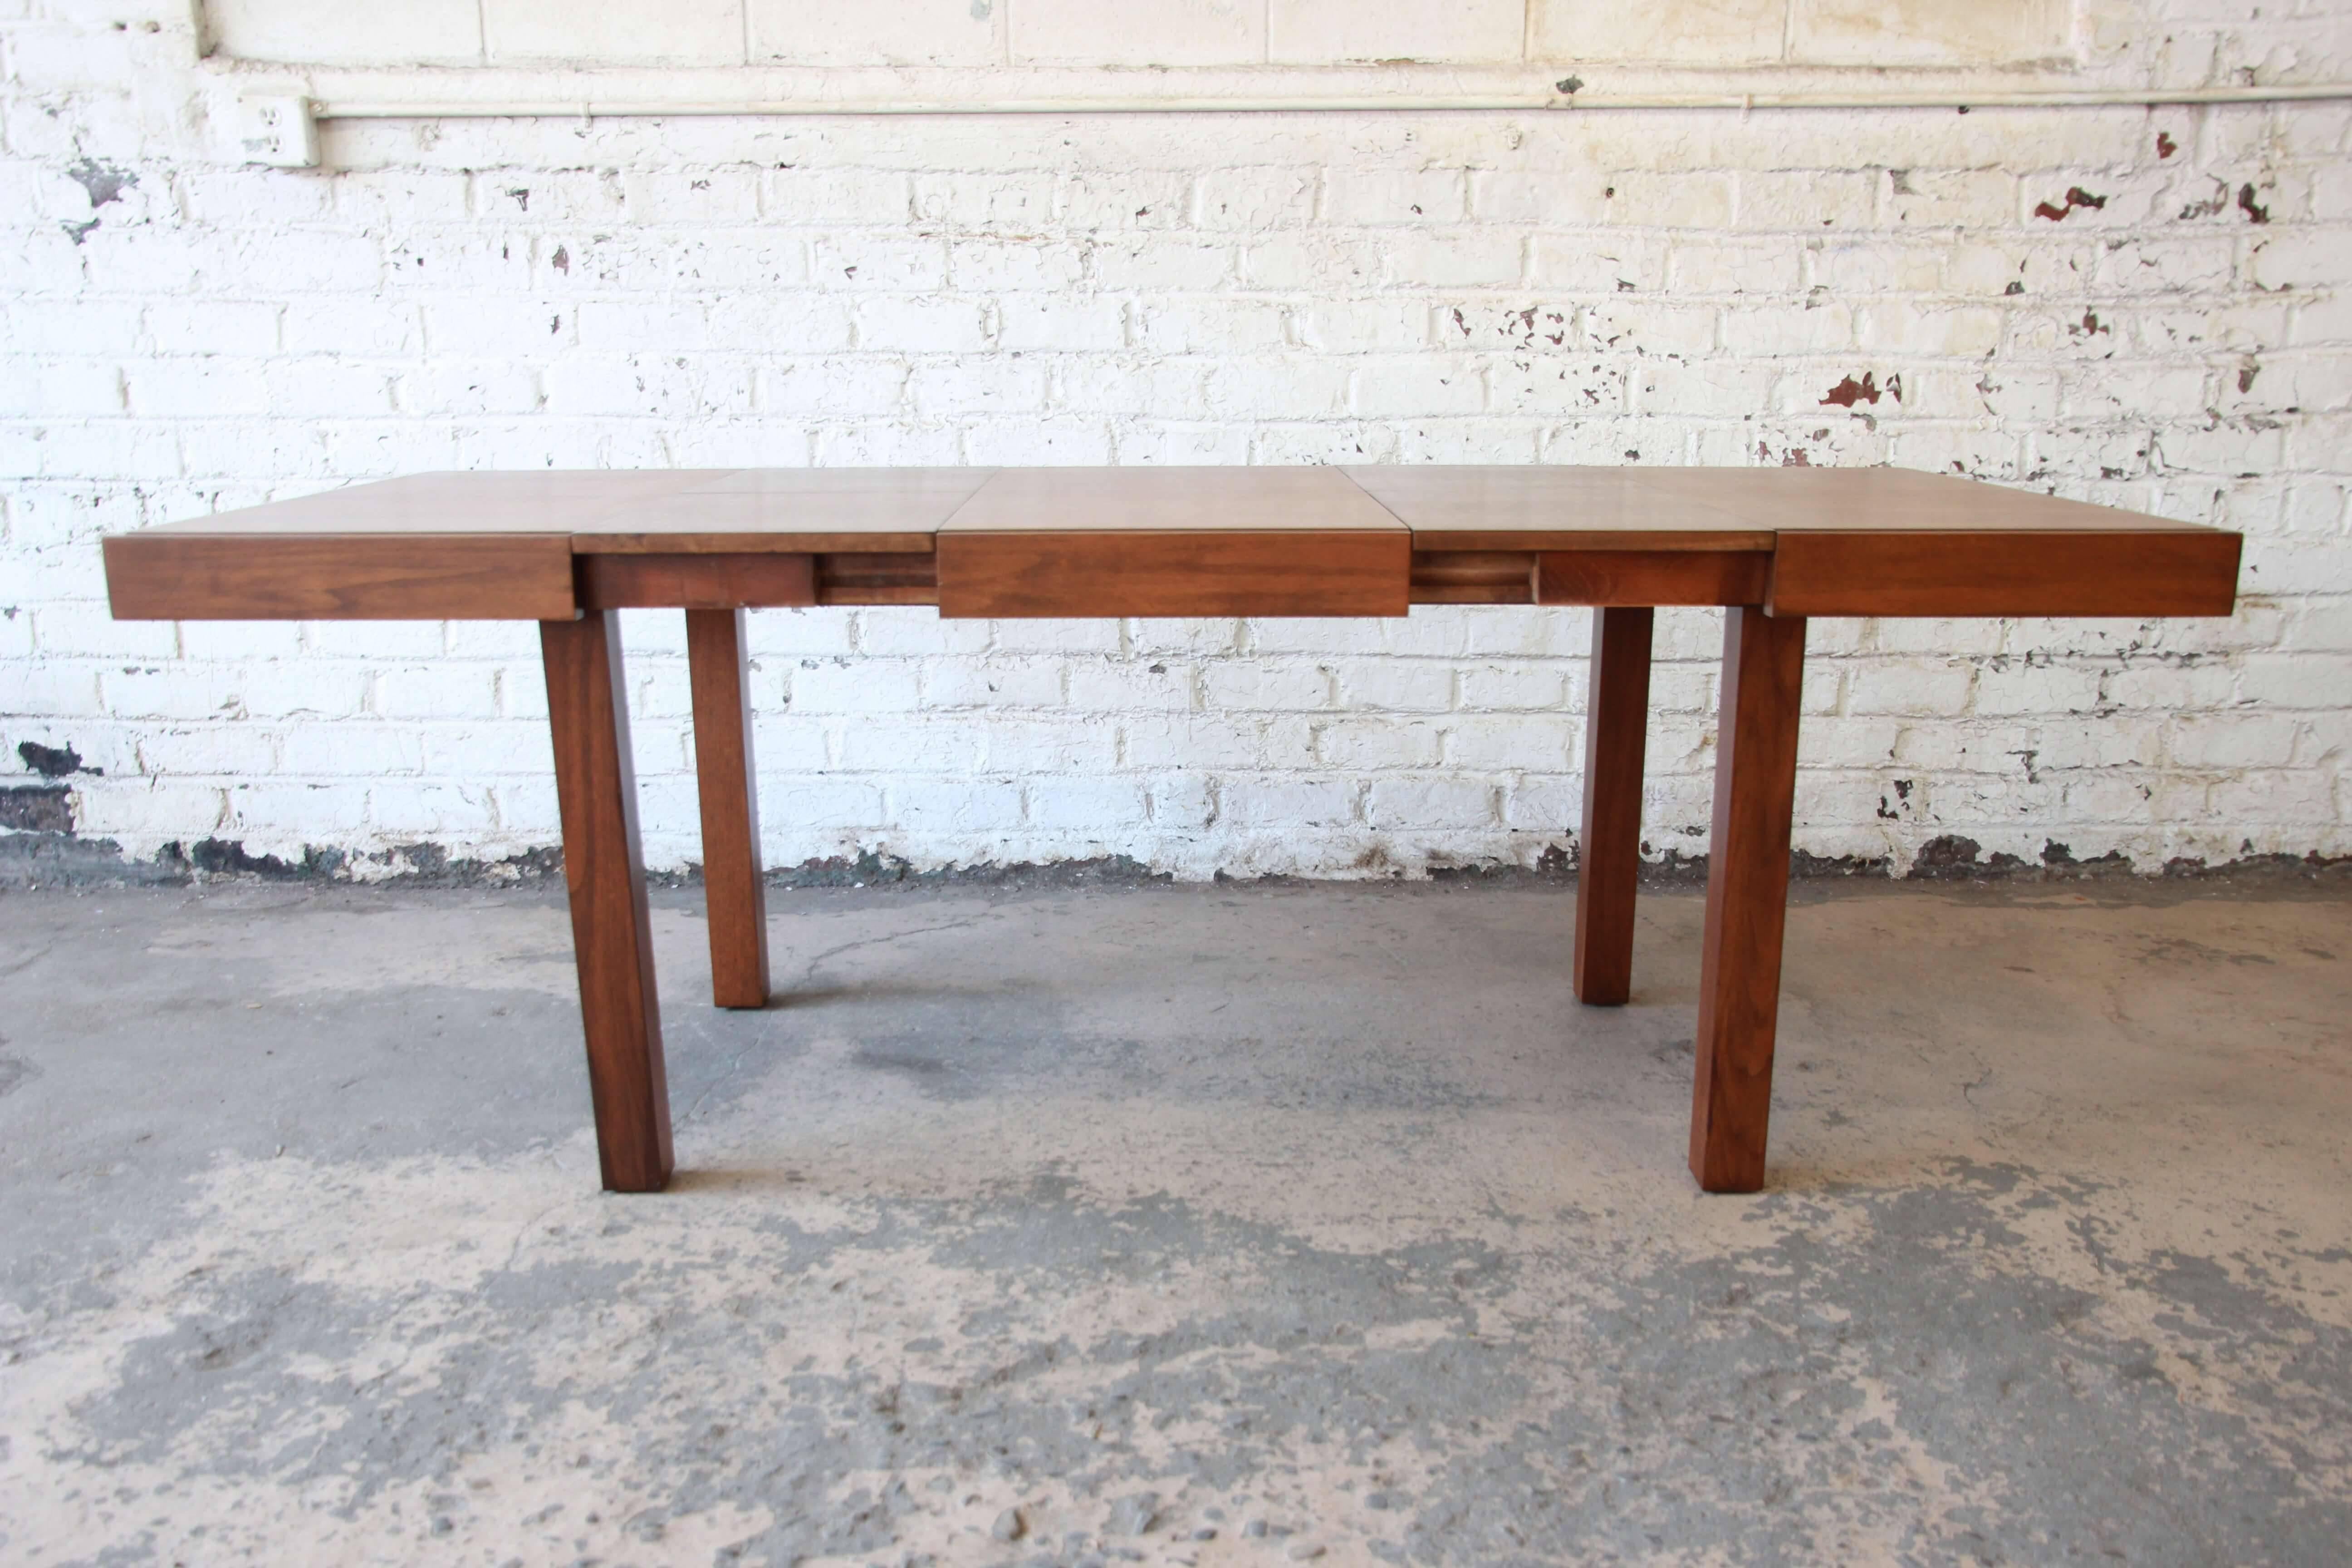 Offering a very nice and refinished extension dining table by George Nelson for Herman Miller. This earlier work of Nelson's has clean geometric lines with a beautiful walnut wood grain. There are two leaves that are stored inside the table and are